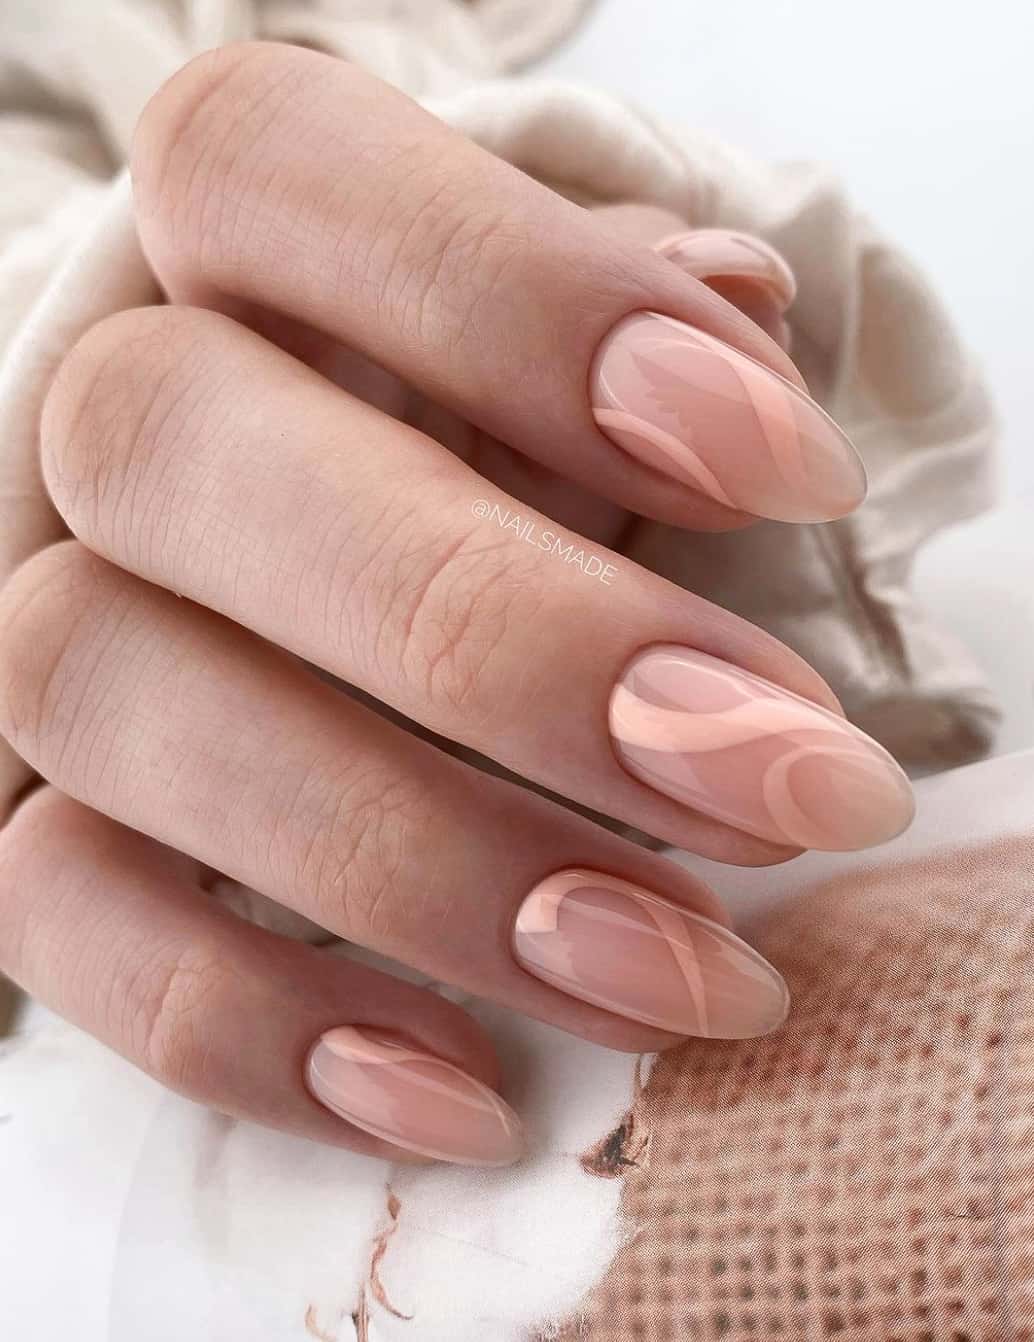 A hand with glossy nude almond nails featuring peach swirls